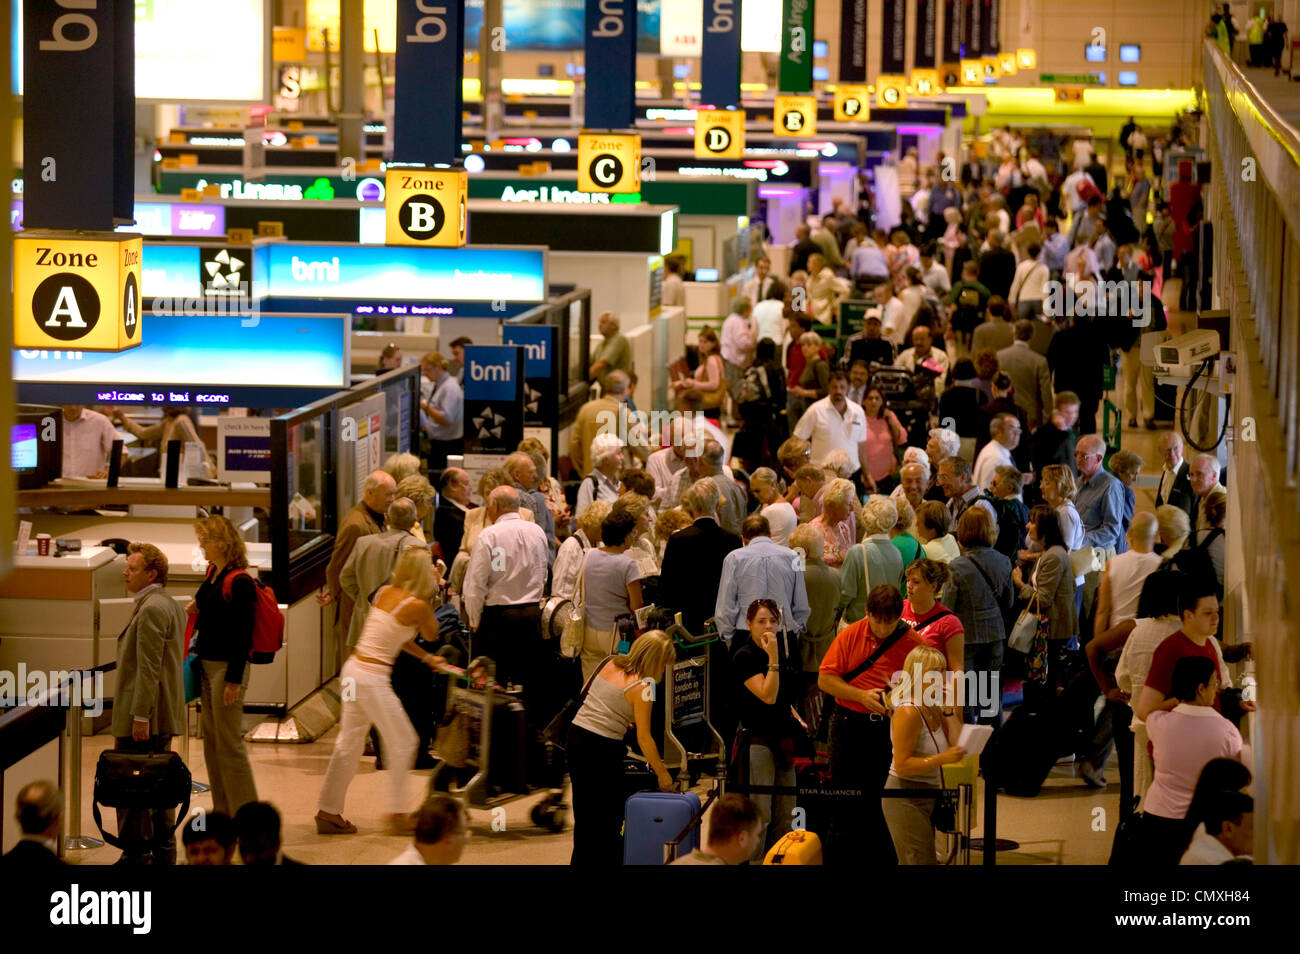 Check In Counters In Busy Departure Lounge At Heathrow Airport